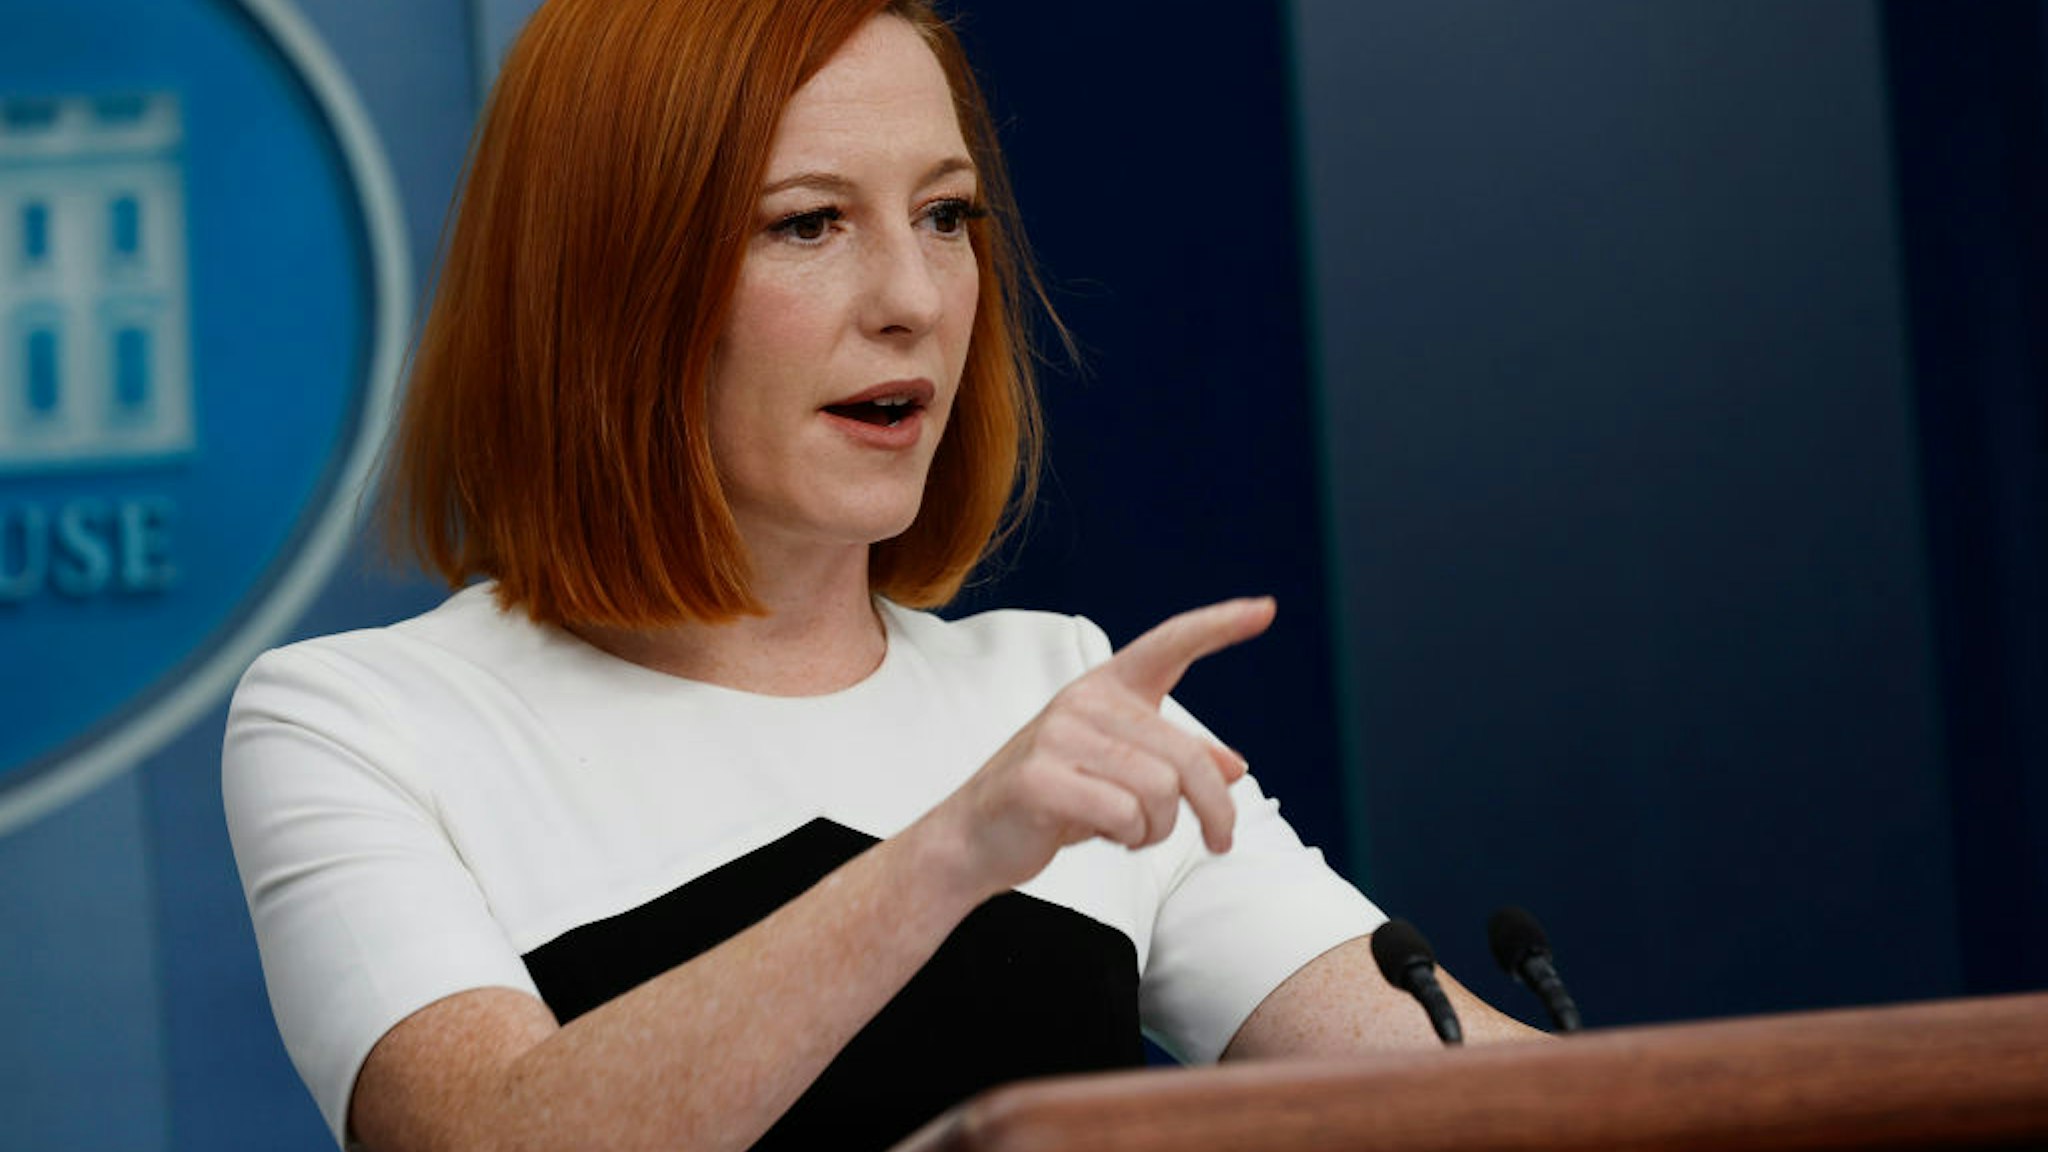 WASHINGTON, DC - MARCH 14: White House Press Secretary Jen Psaki talks to reporters during the daily news conference in the Brady Press Briefing Room at the White House on March 14, 2022 in Washington, DC. Psaki fielded questions about the ongoing invasion of Ukraine by Russia, Sen. Joe Manchin's opposition to Sarah Bloom Raskin’s nomination to the Federal Reserve Board, and other topics. (Photo by Chip Somodevilla/Getty Images)